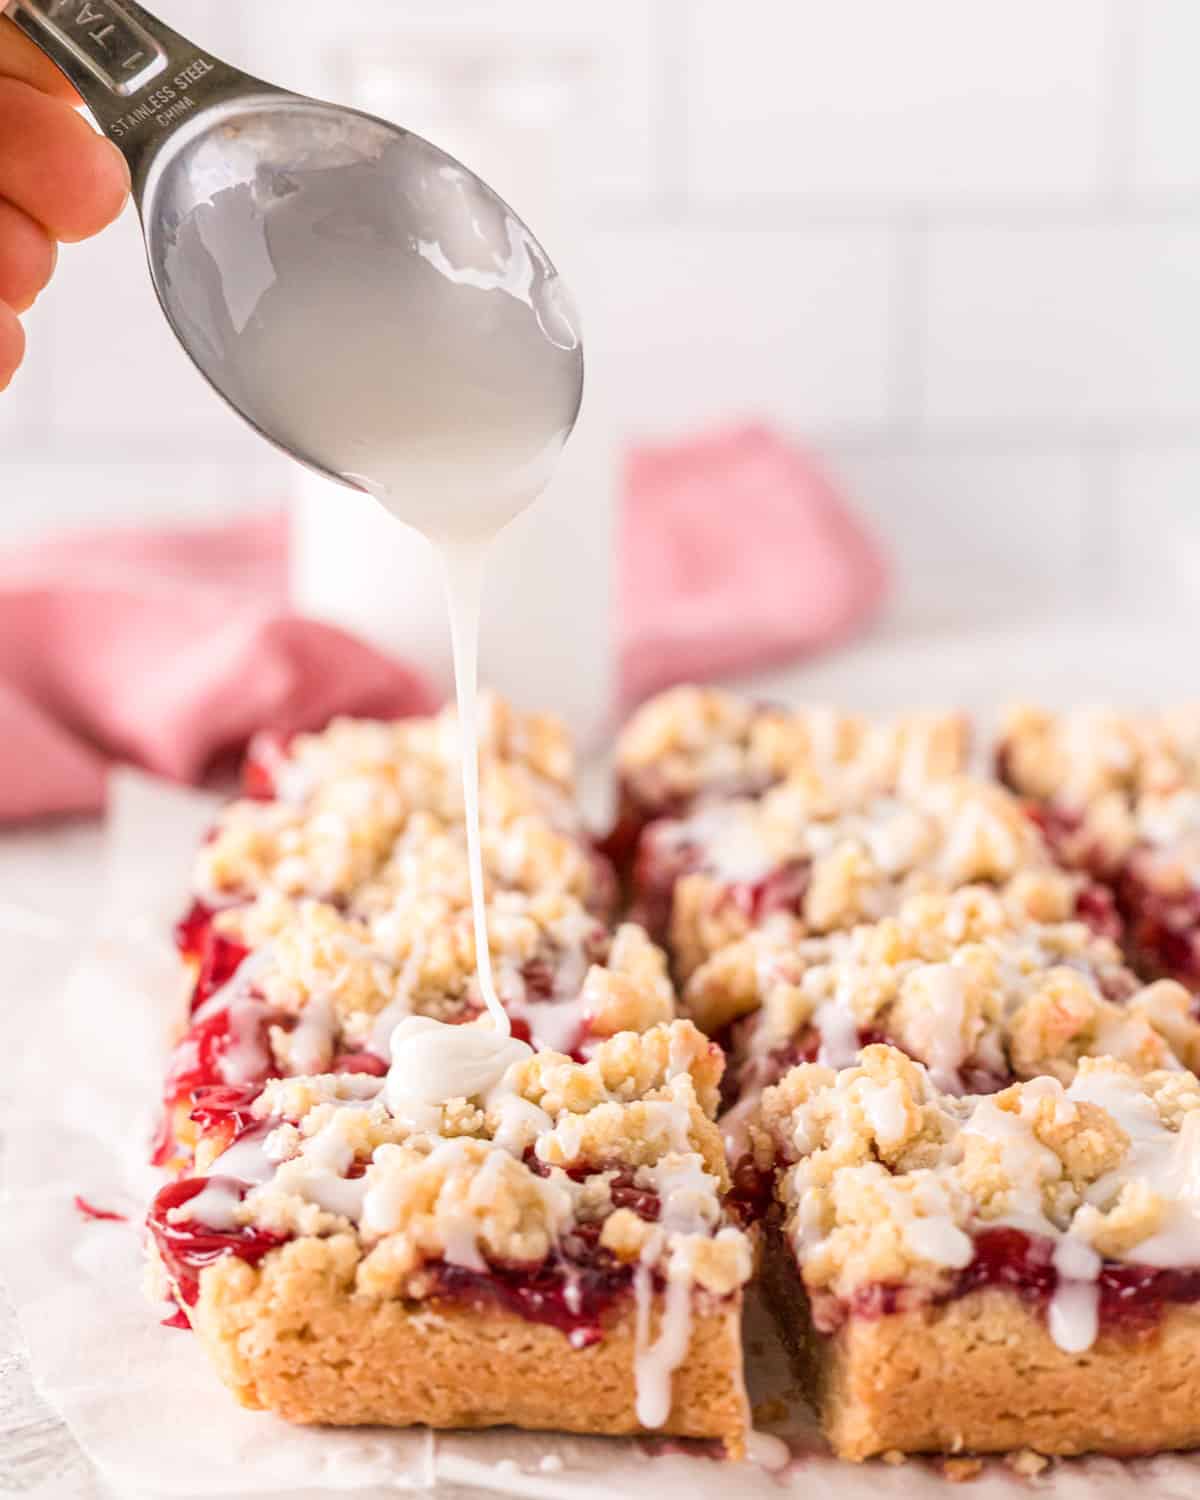 tablespoon drizzling glaze over cherry bars